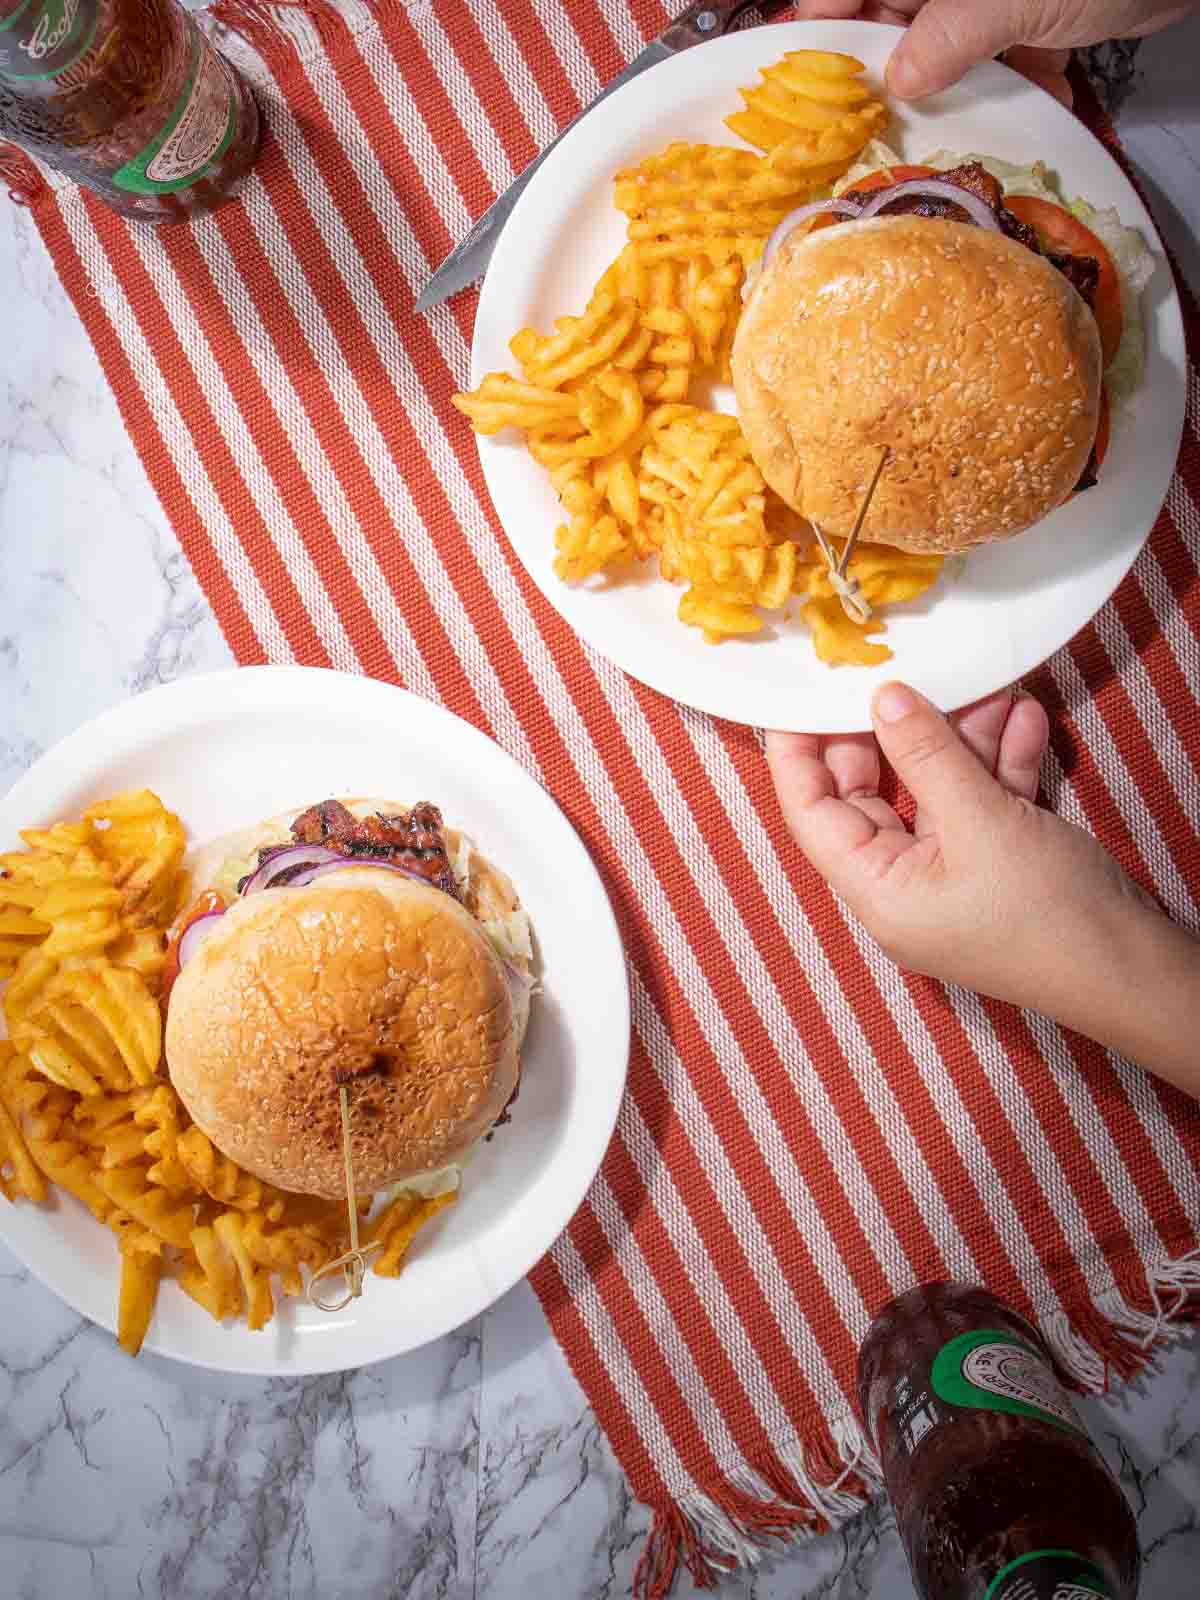 two plates of burger and chips